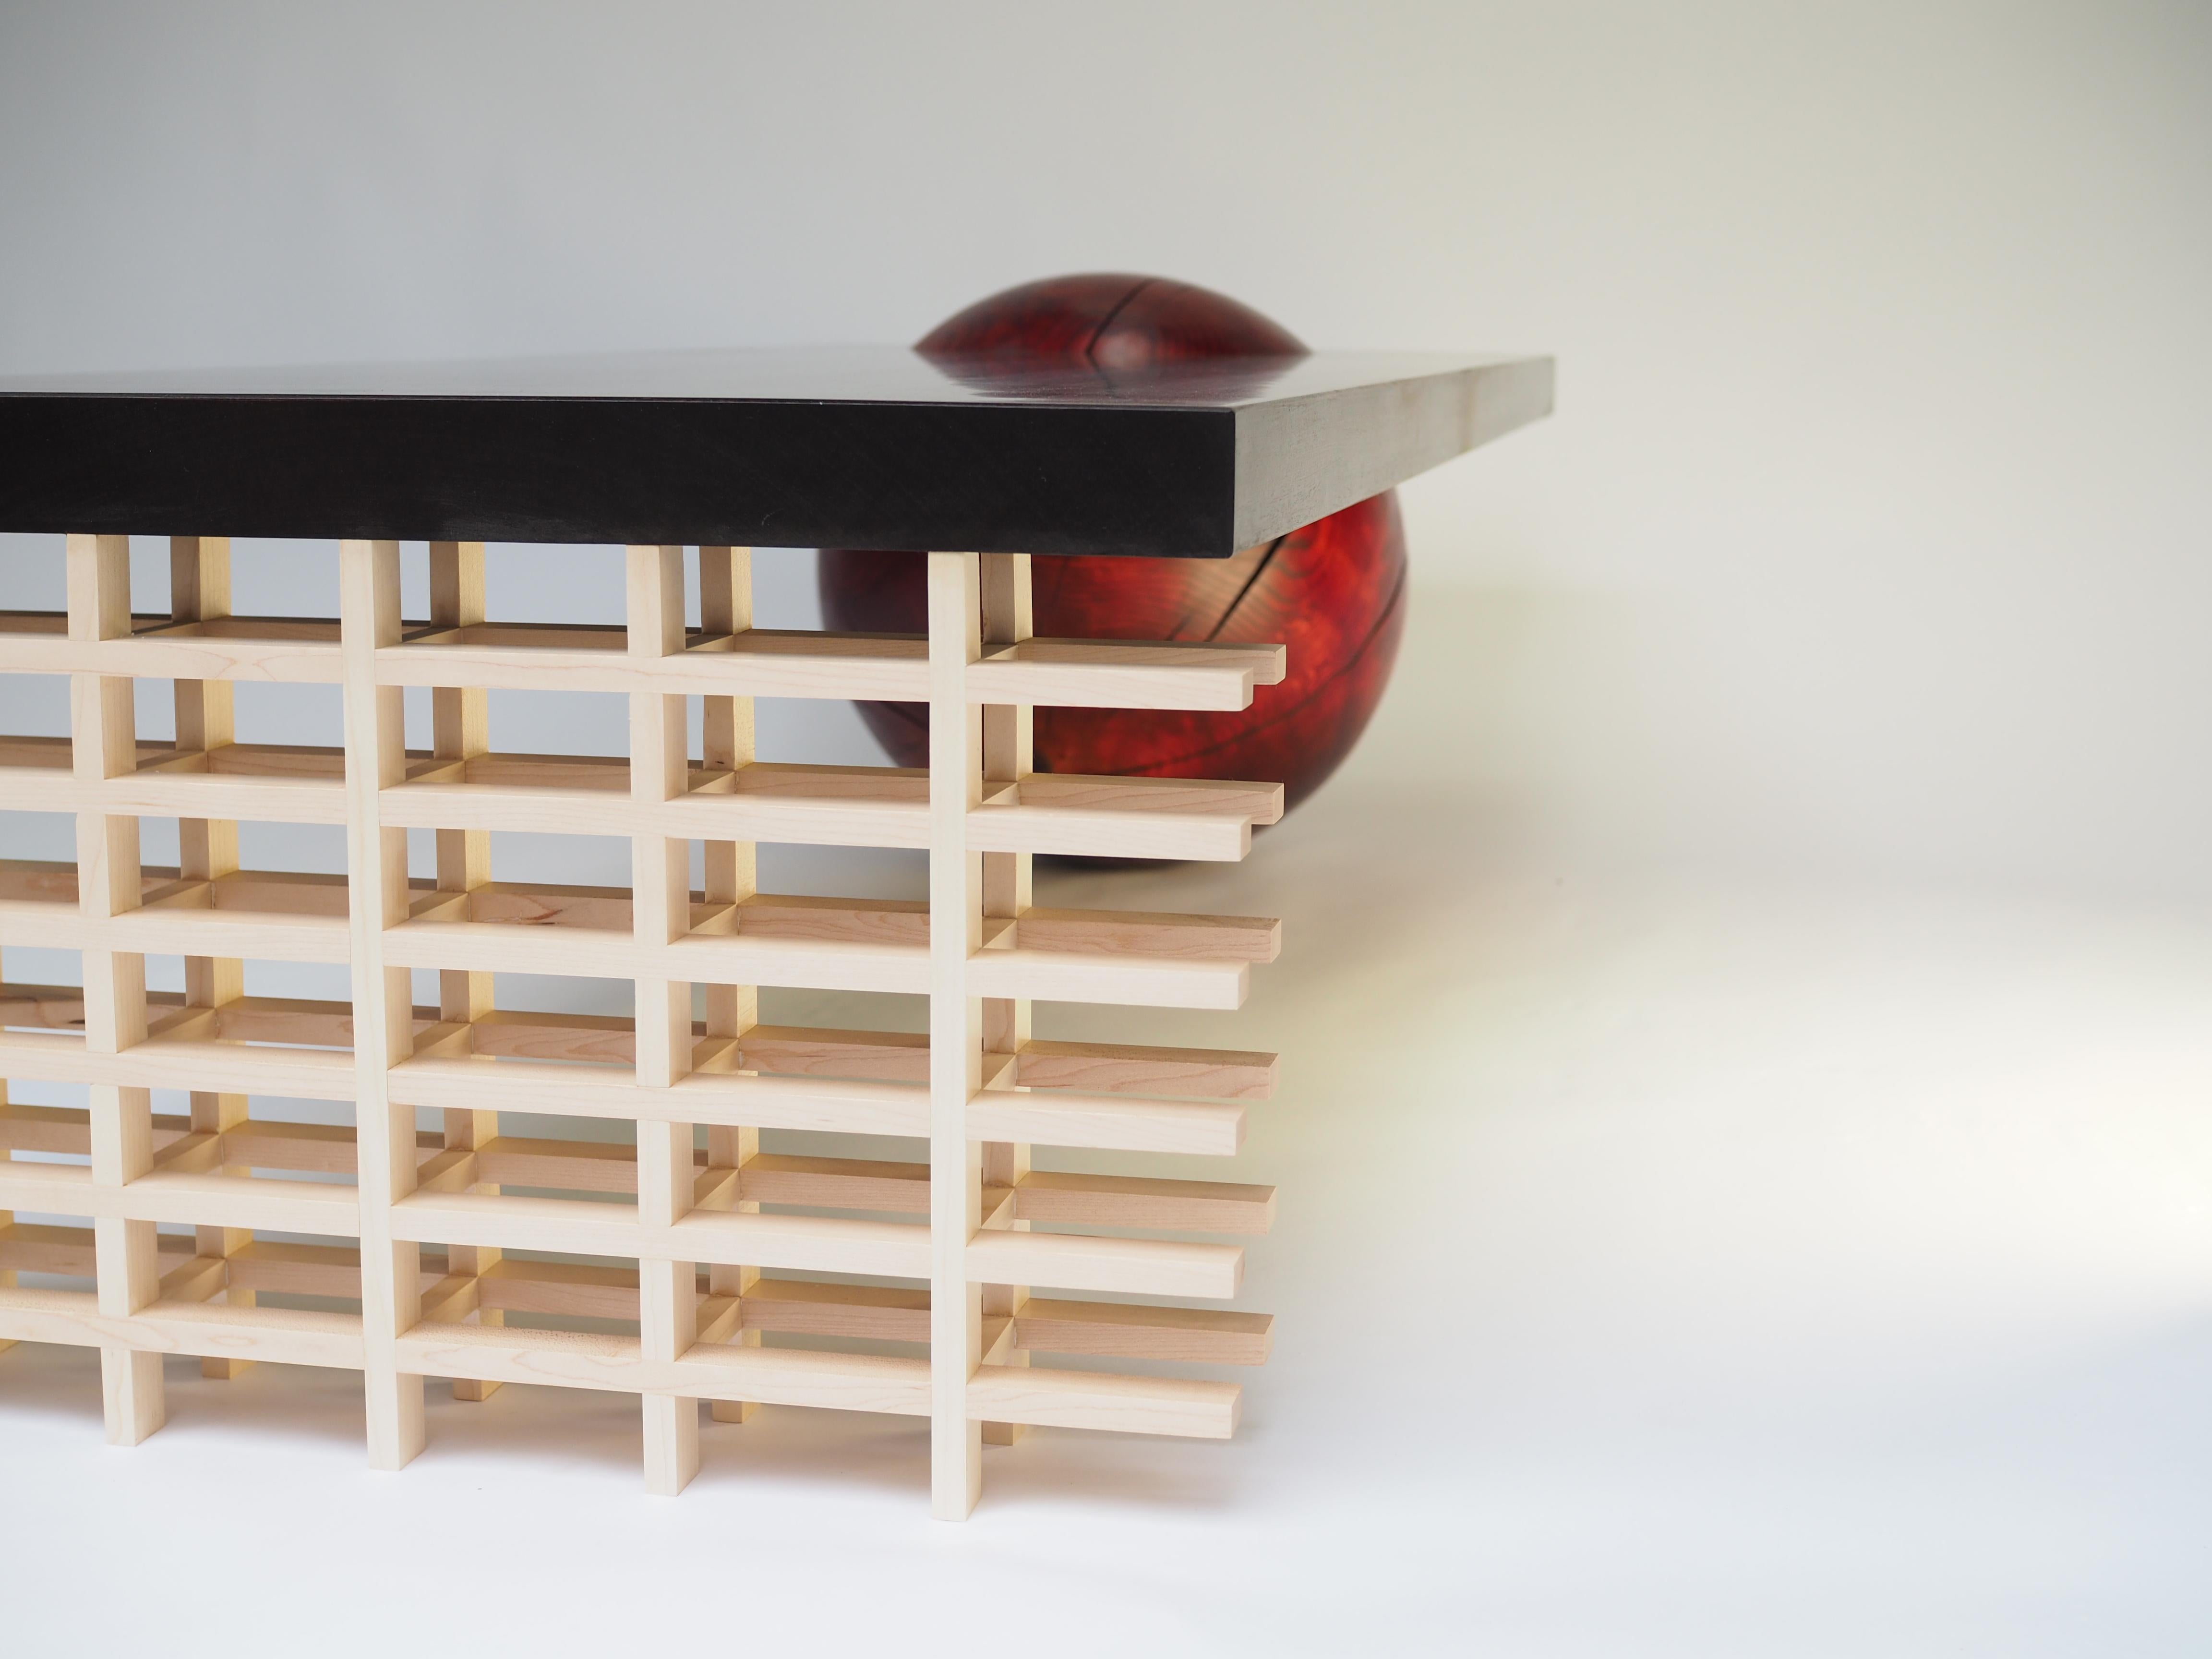 The Rising Sun coffee table has been designed and hand made by designer/maker Josh Kennard, owner of Forge Creative and is a playful nod to Japanese style and culture. The design incorporates clean, crisp, Maple lattice work, skilful turning of a